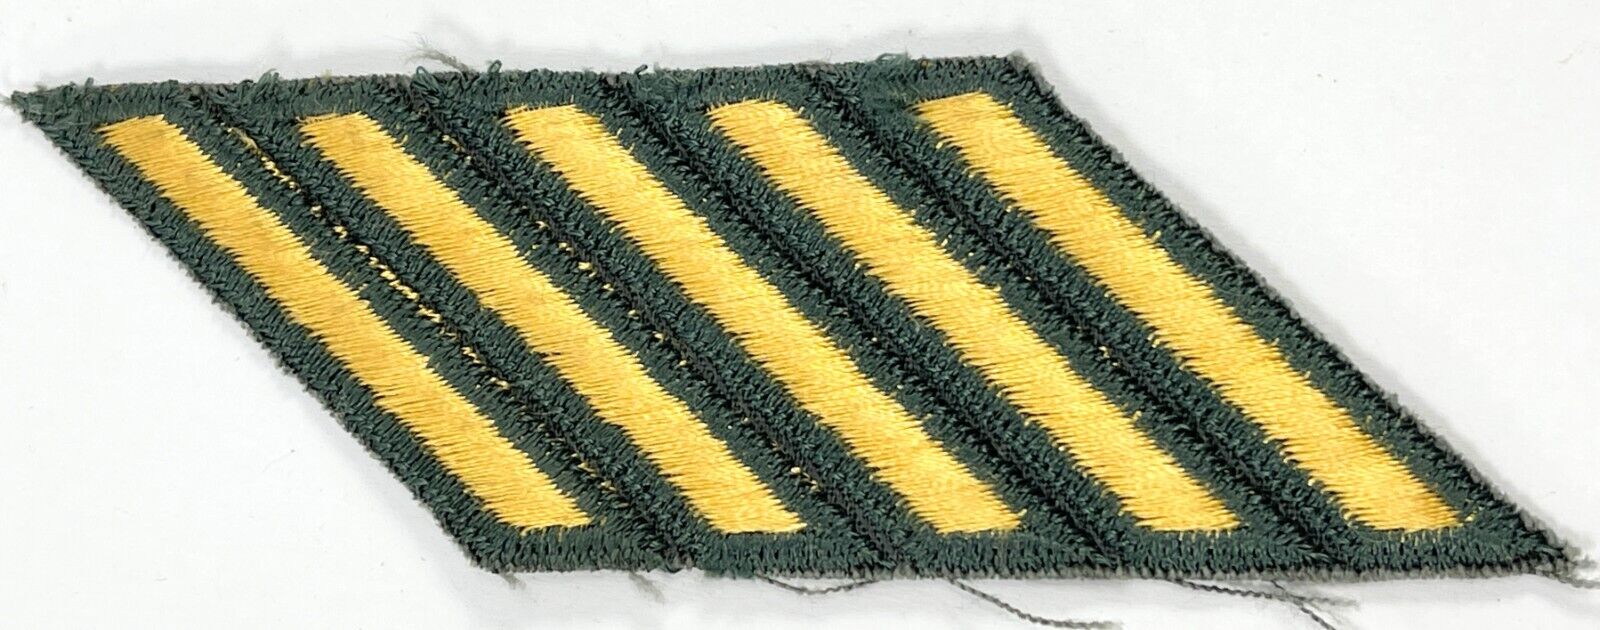 US Army Vintage Green Patches Military Star Stripes Soldier